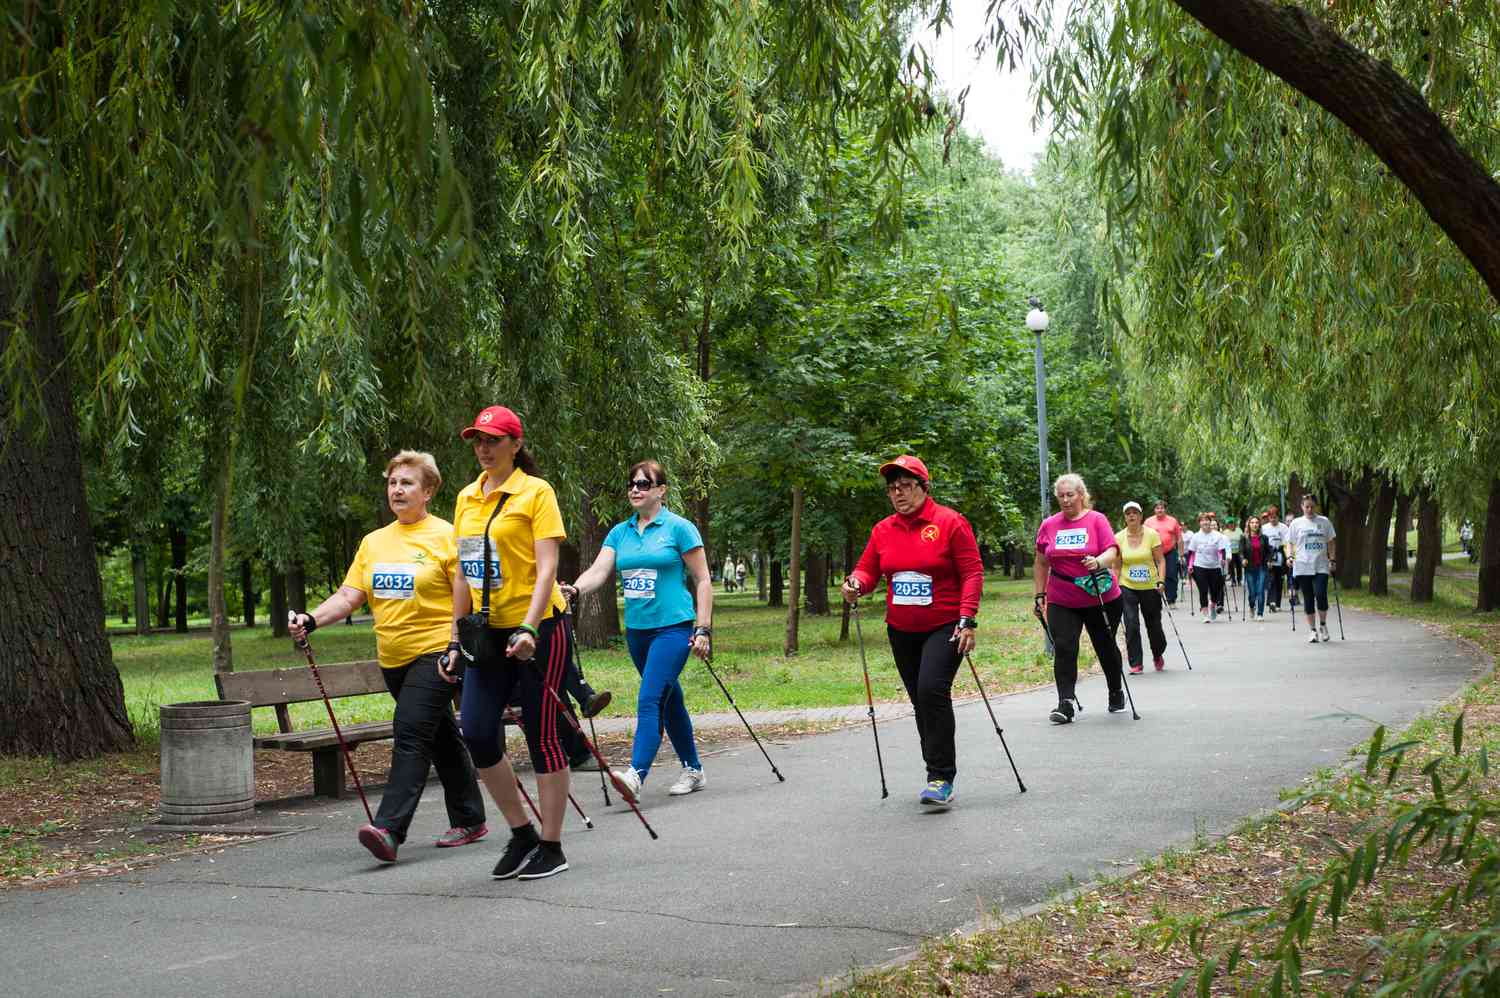 Walkers during a marathon in a park